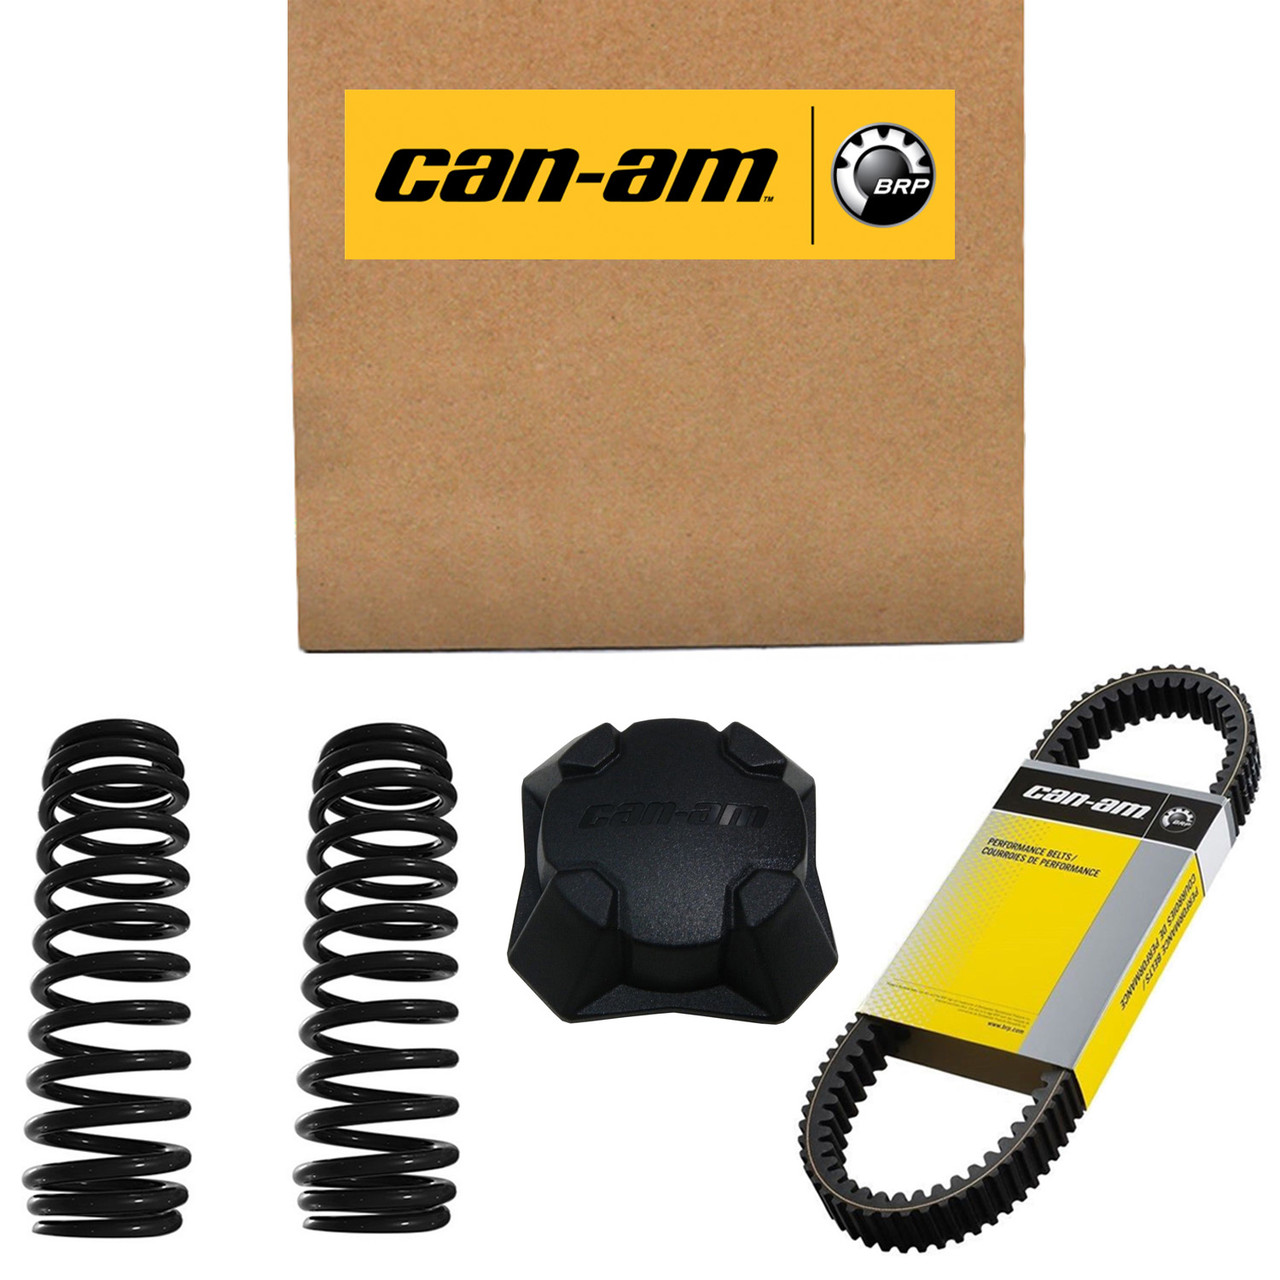 Can-Am New OEM Winch Interrupter, 710005241